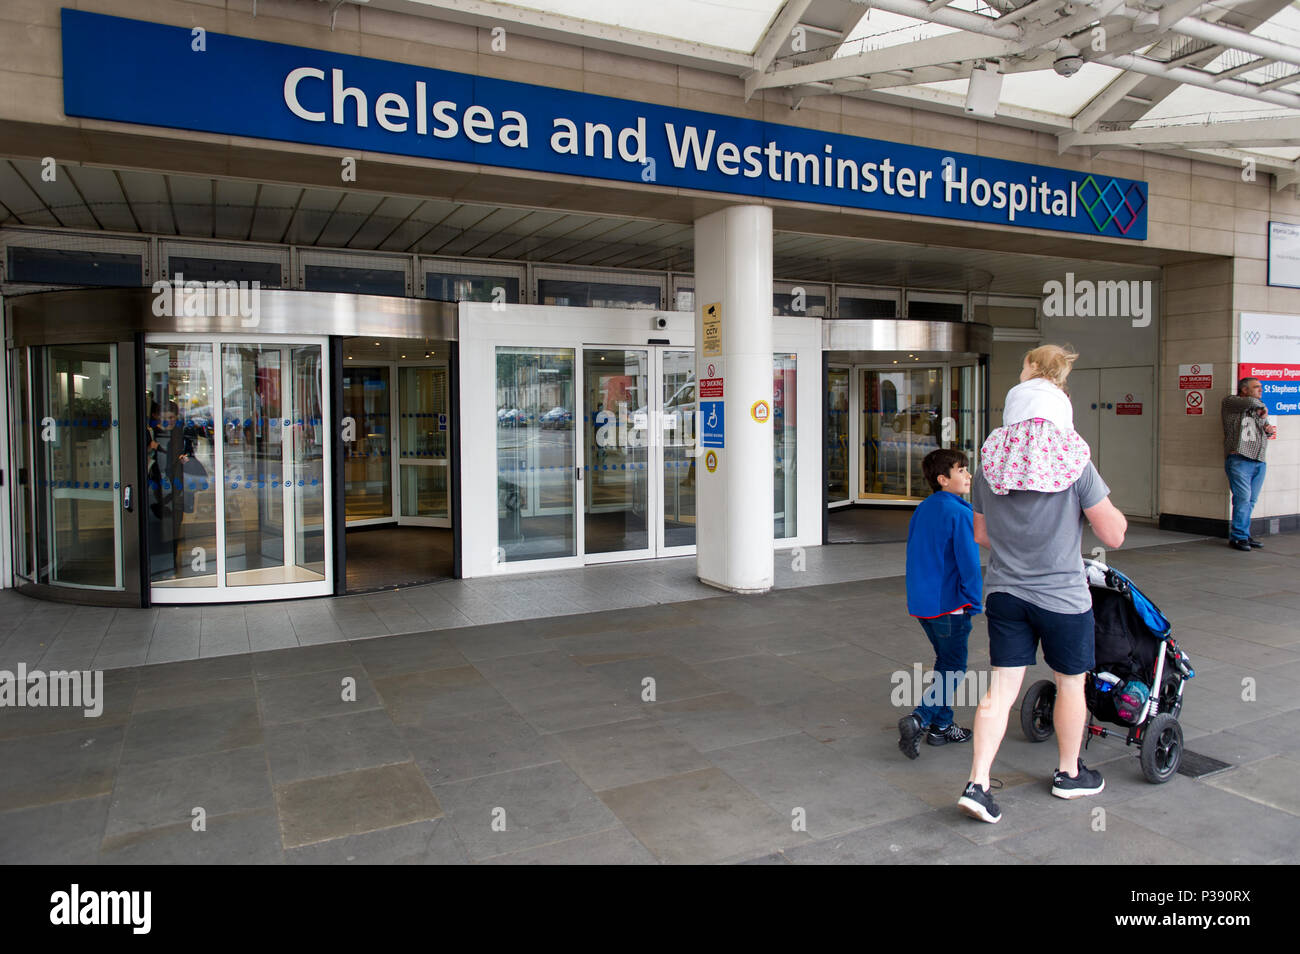 General view of the entrance of the Chelsea and Westminster Hospital.  The Home Office has released the medicinal cannabis oil it confiscated from Billy Caldwell's family, who had been using it to treat his severe epilepsy. The government backdown came shortly after the 12-year-old's mother, Charlotte, said she was confident the Home Office would grant a special licence so her son could be treated with the anti-epileptic cannabis medicine. Stock Photo